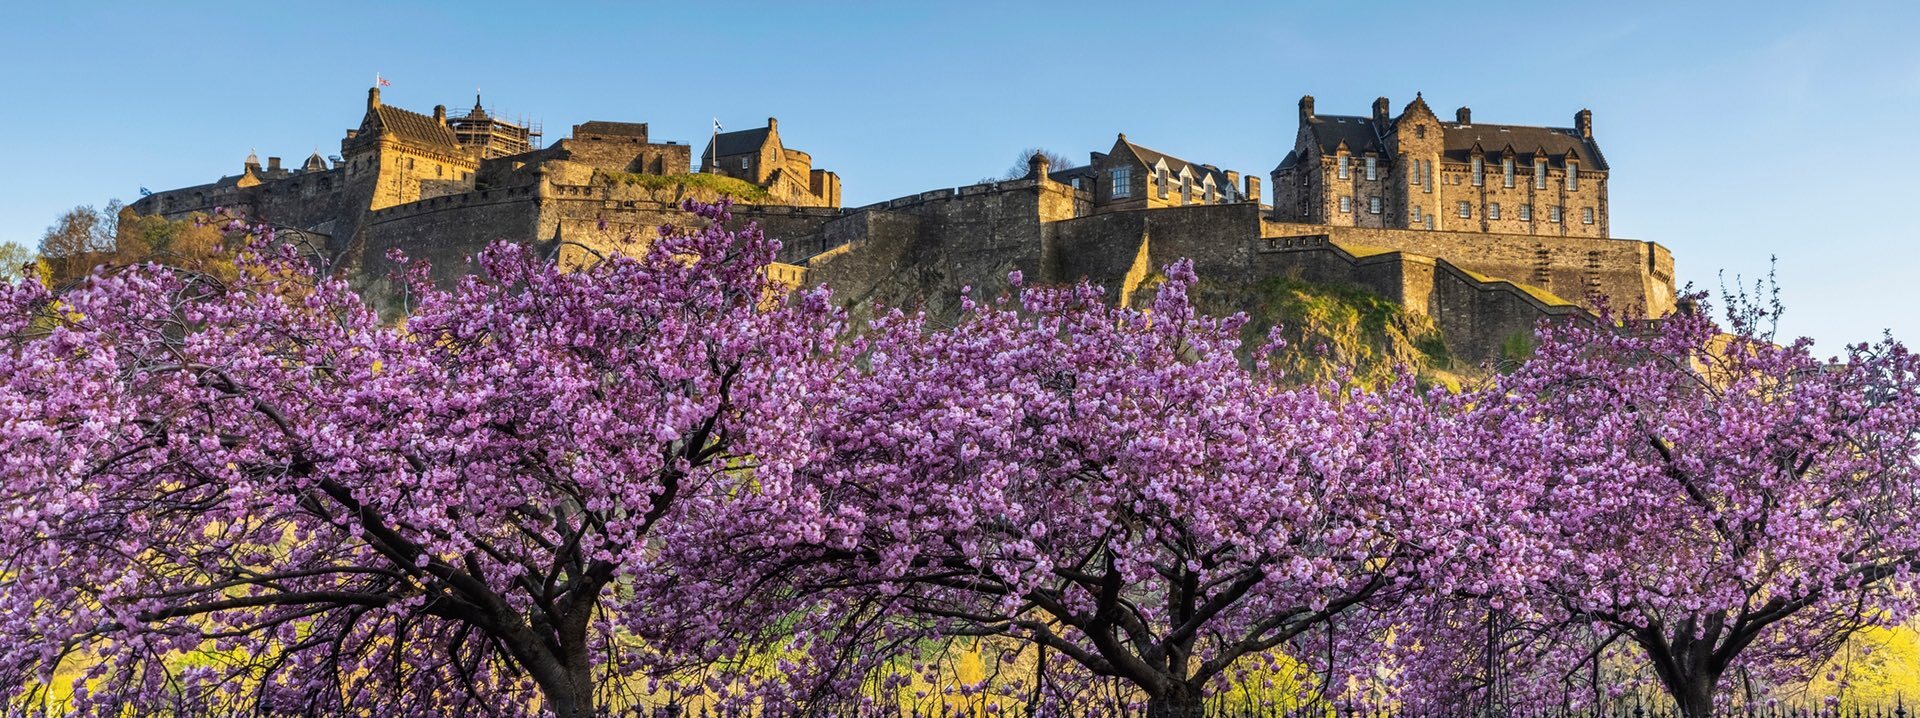 Looking up at Edinburgh Castle, the tops of some blossom trees below